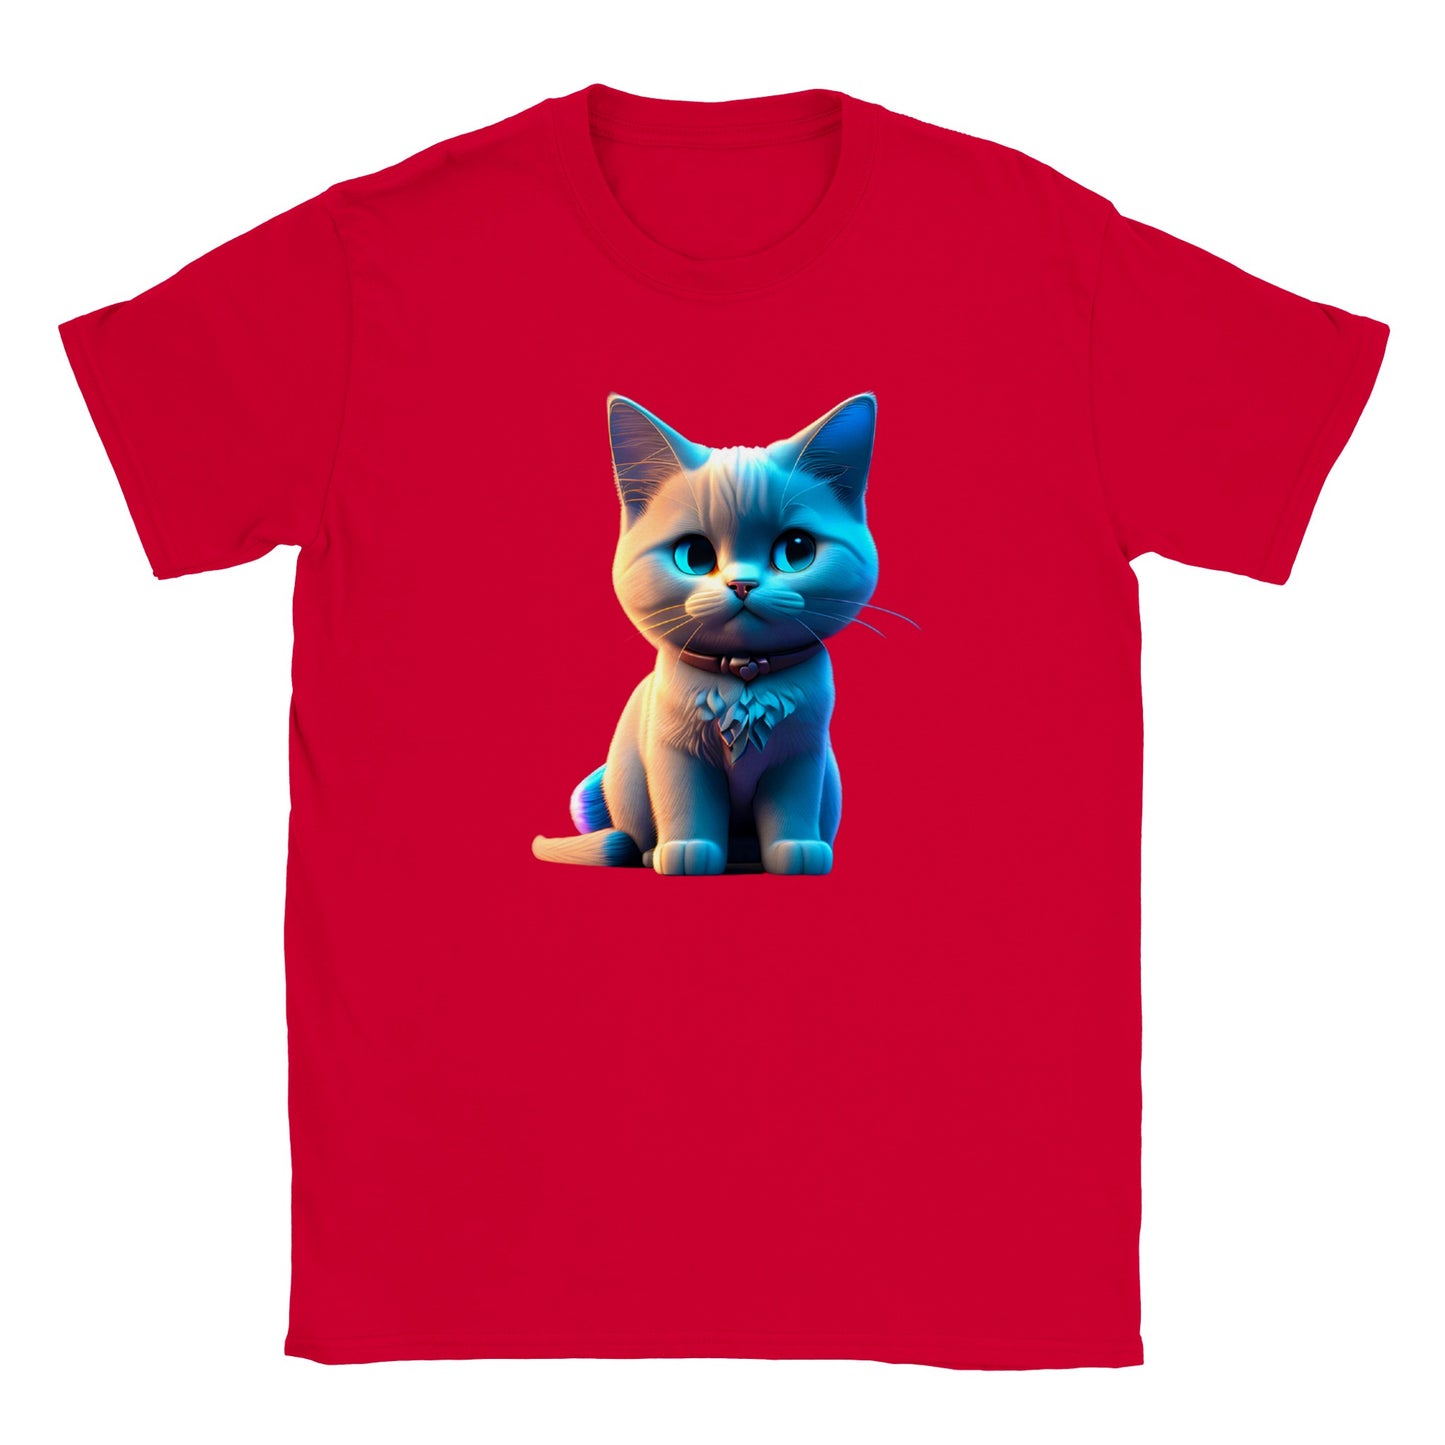 Adorable, Cool, Cute Cats and Kittens Toy - Classic Kids Crewneck T-Shirt 34